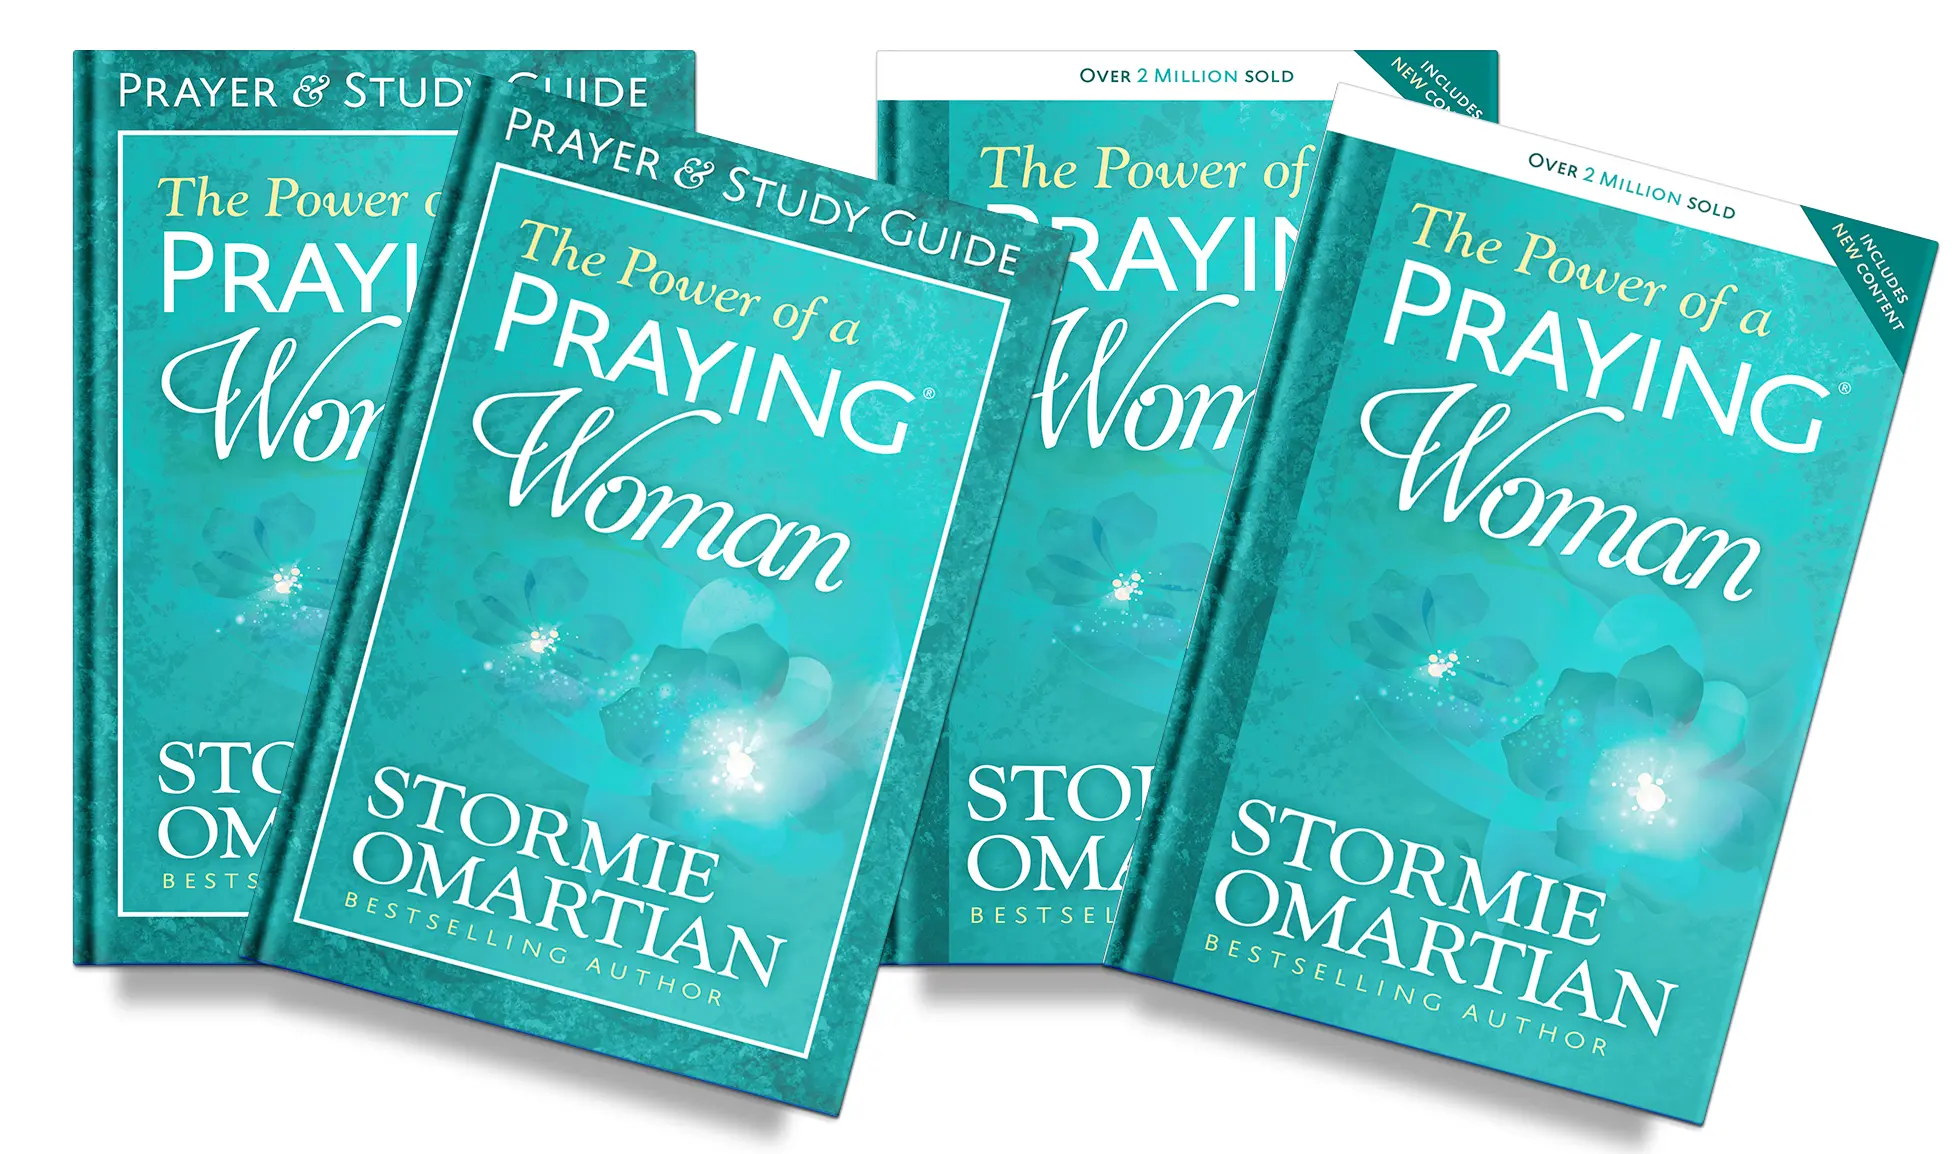 **Study Group** The Power of a Praying Woman